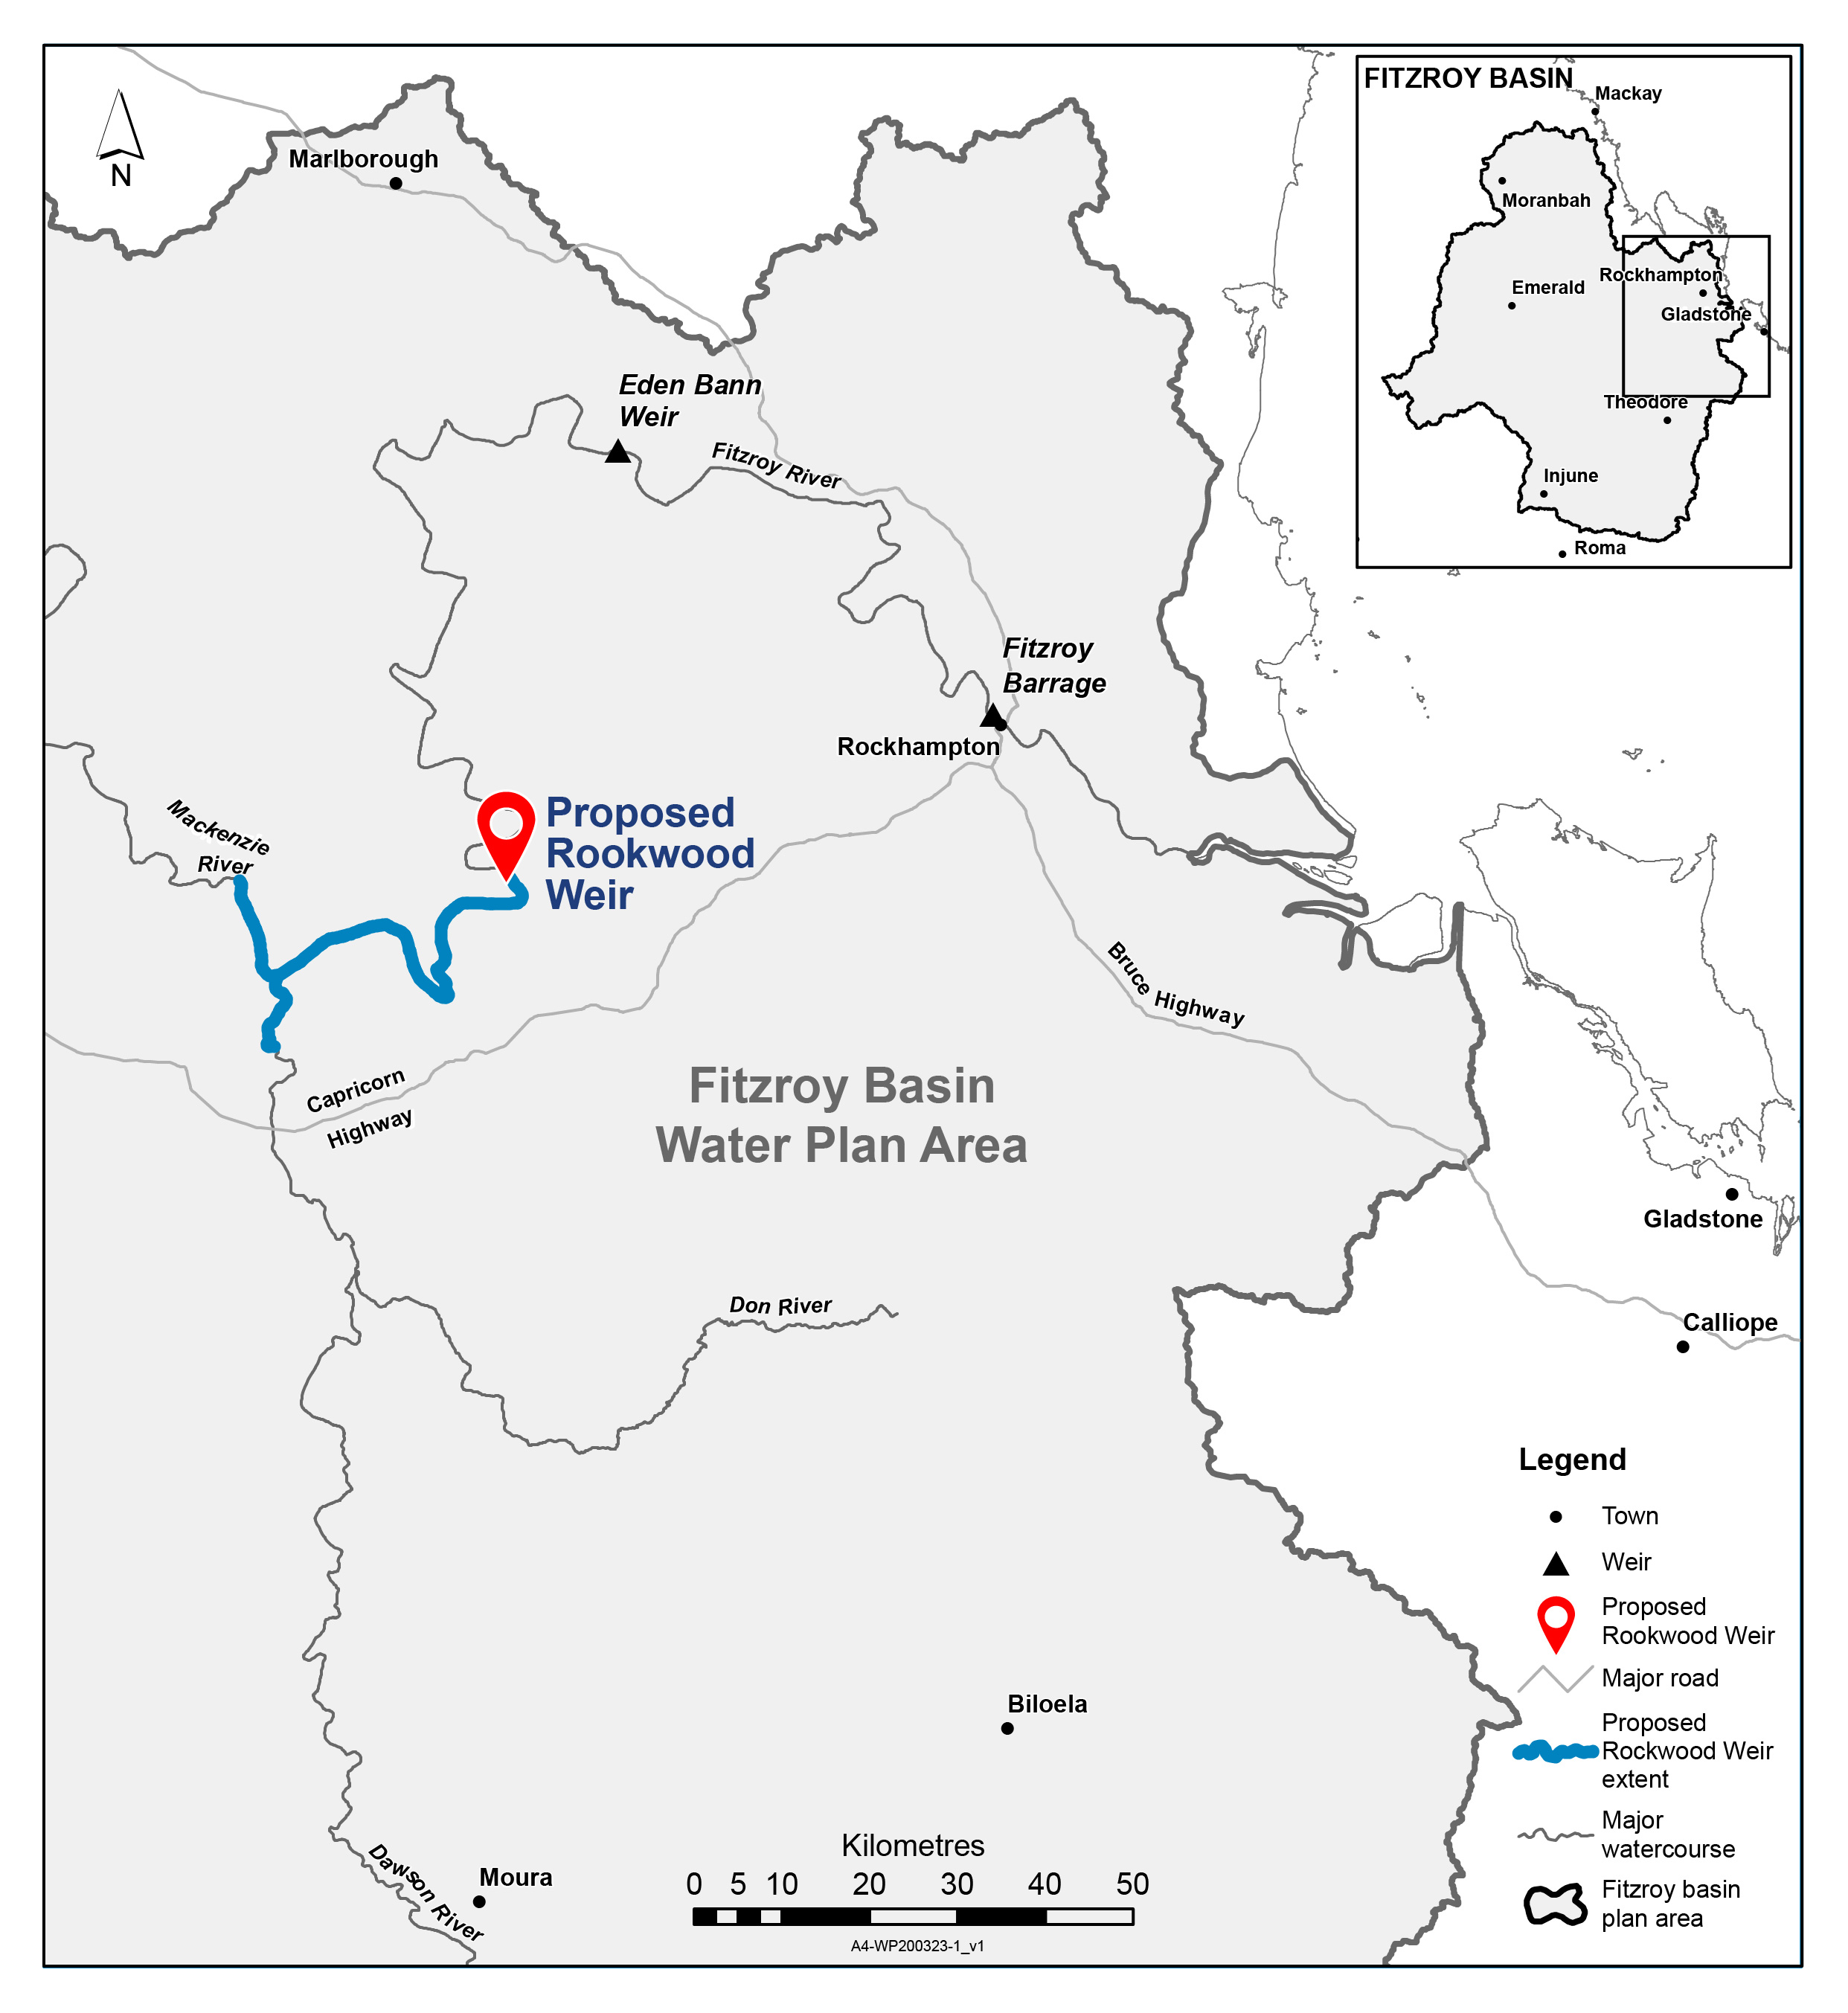 Map showing the proposed location of the Rookwood Weir in the context of the Fitzroy Basin area. Rookwood Weir will be constructed on the Fitzroy River, Central Queensland, approximately 66km south-west of Rockhampton.